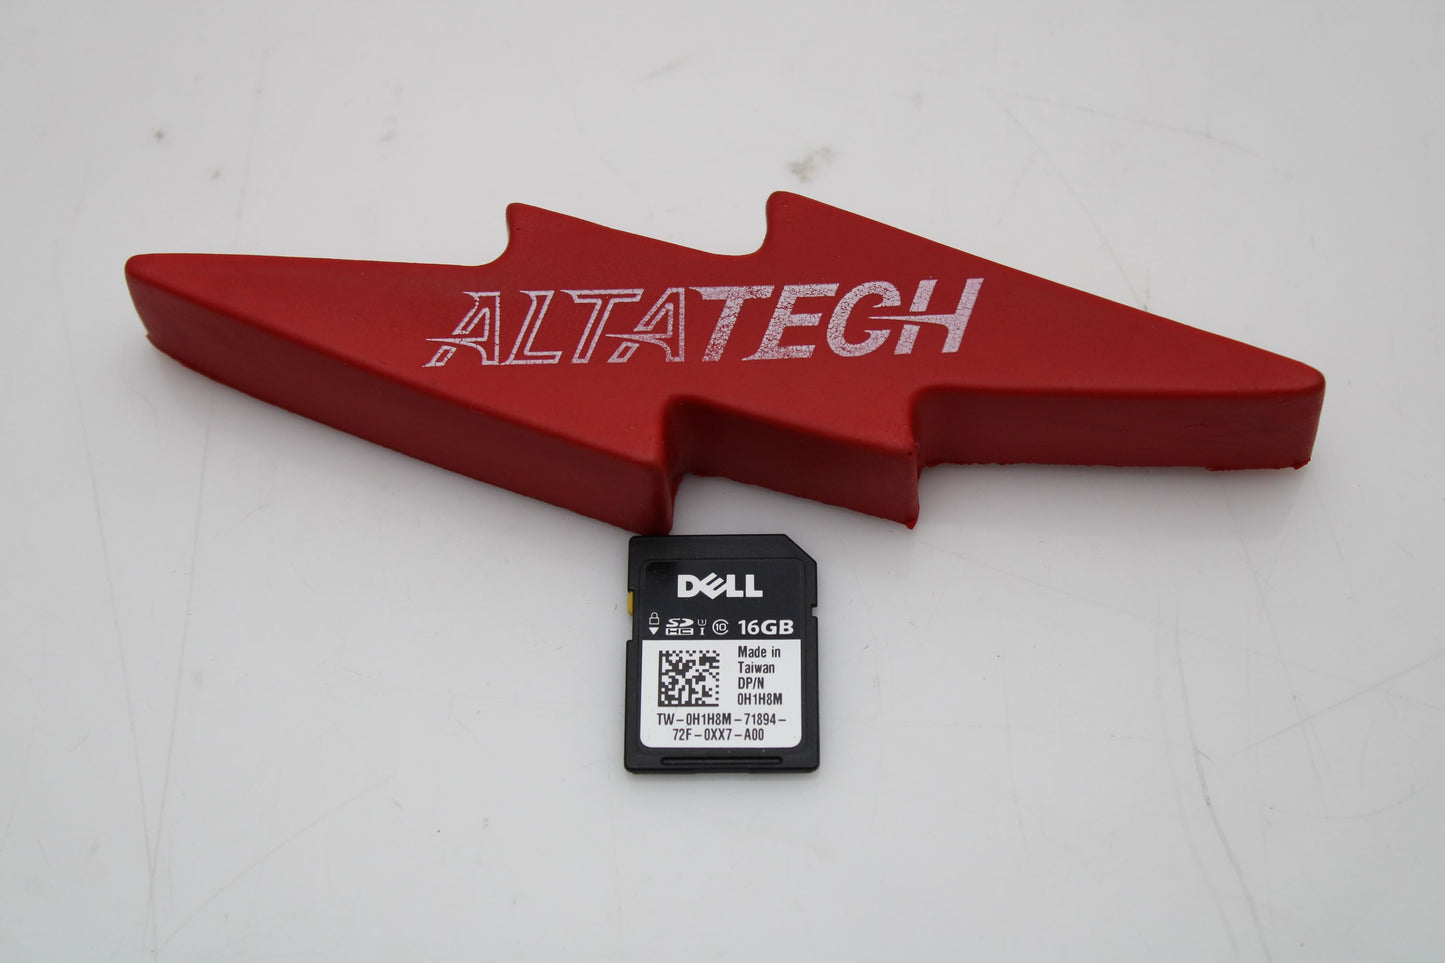 Dell 37D9D 16GB SD Card G13 ISDN HC R730, Used